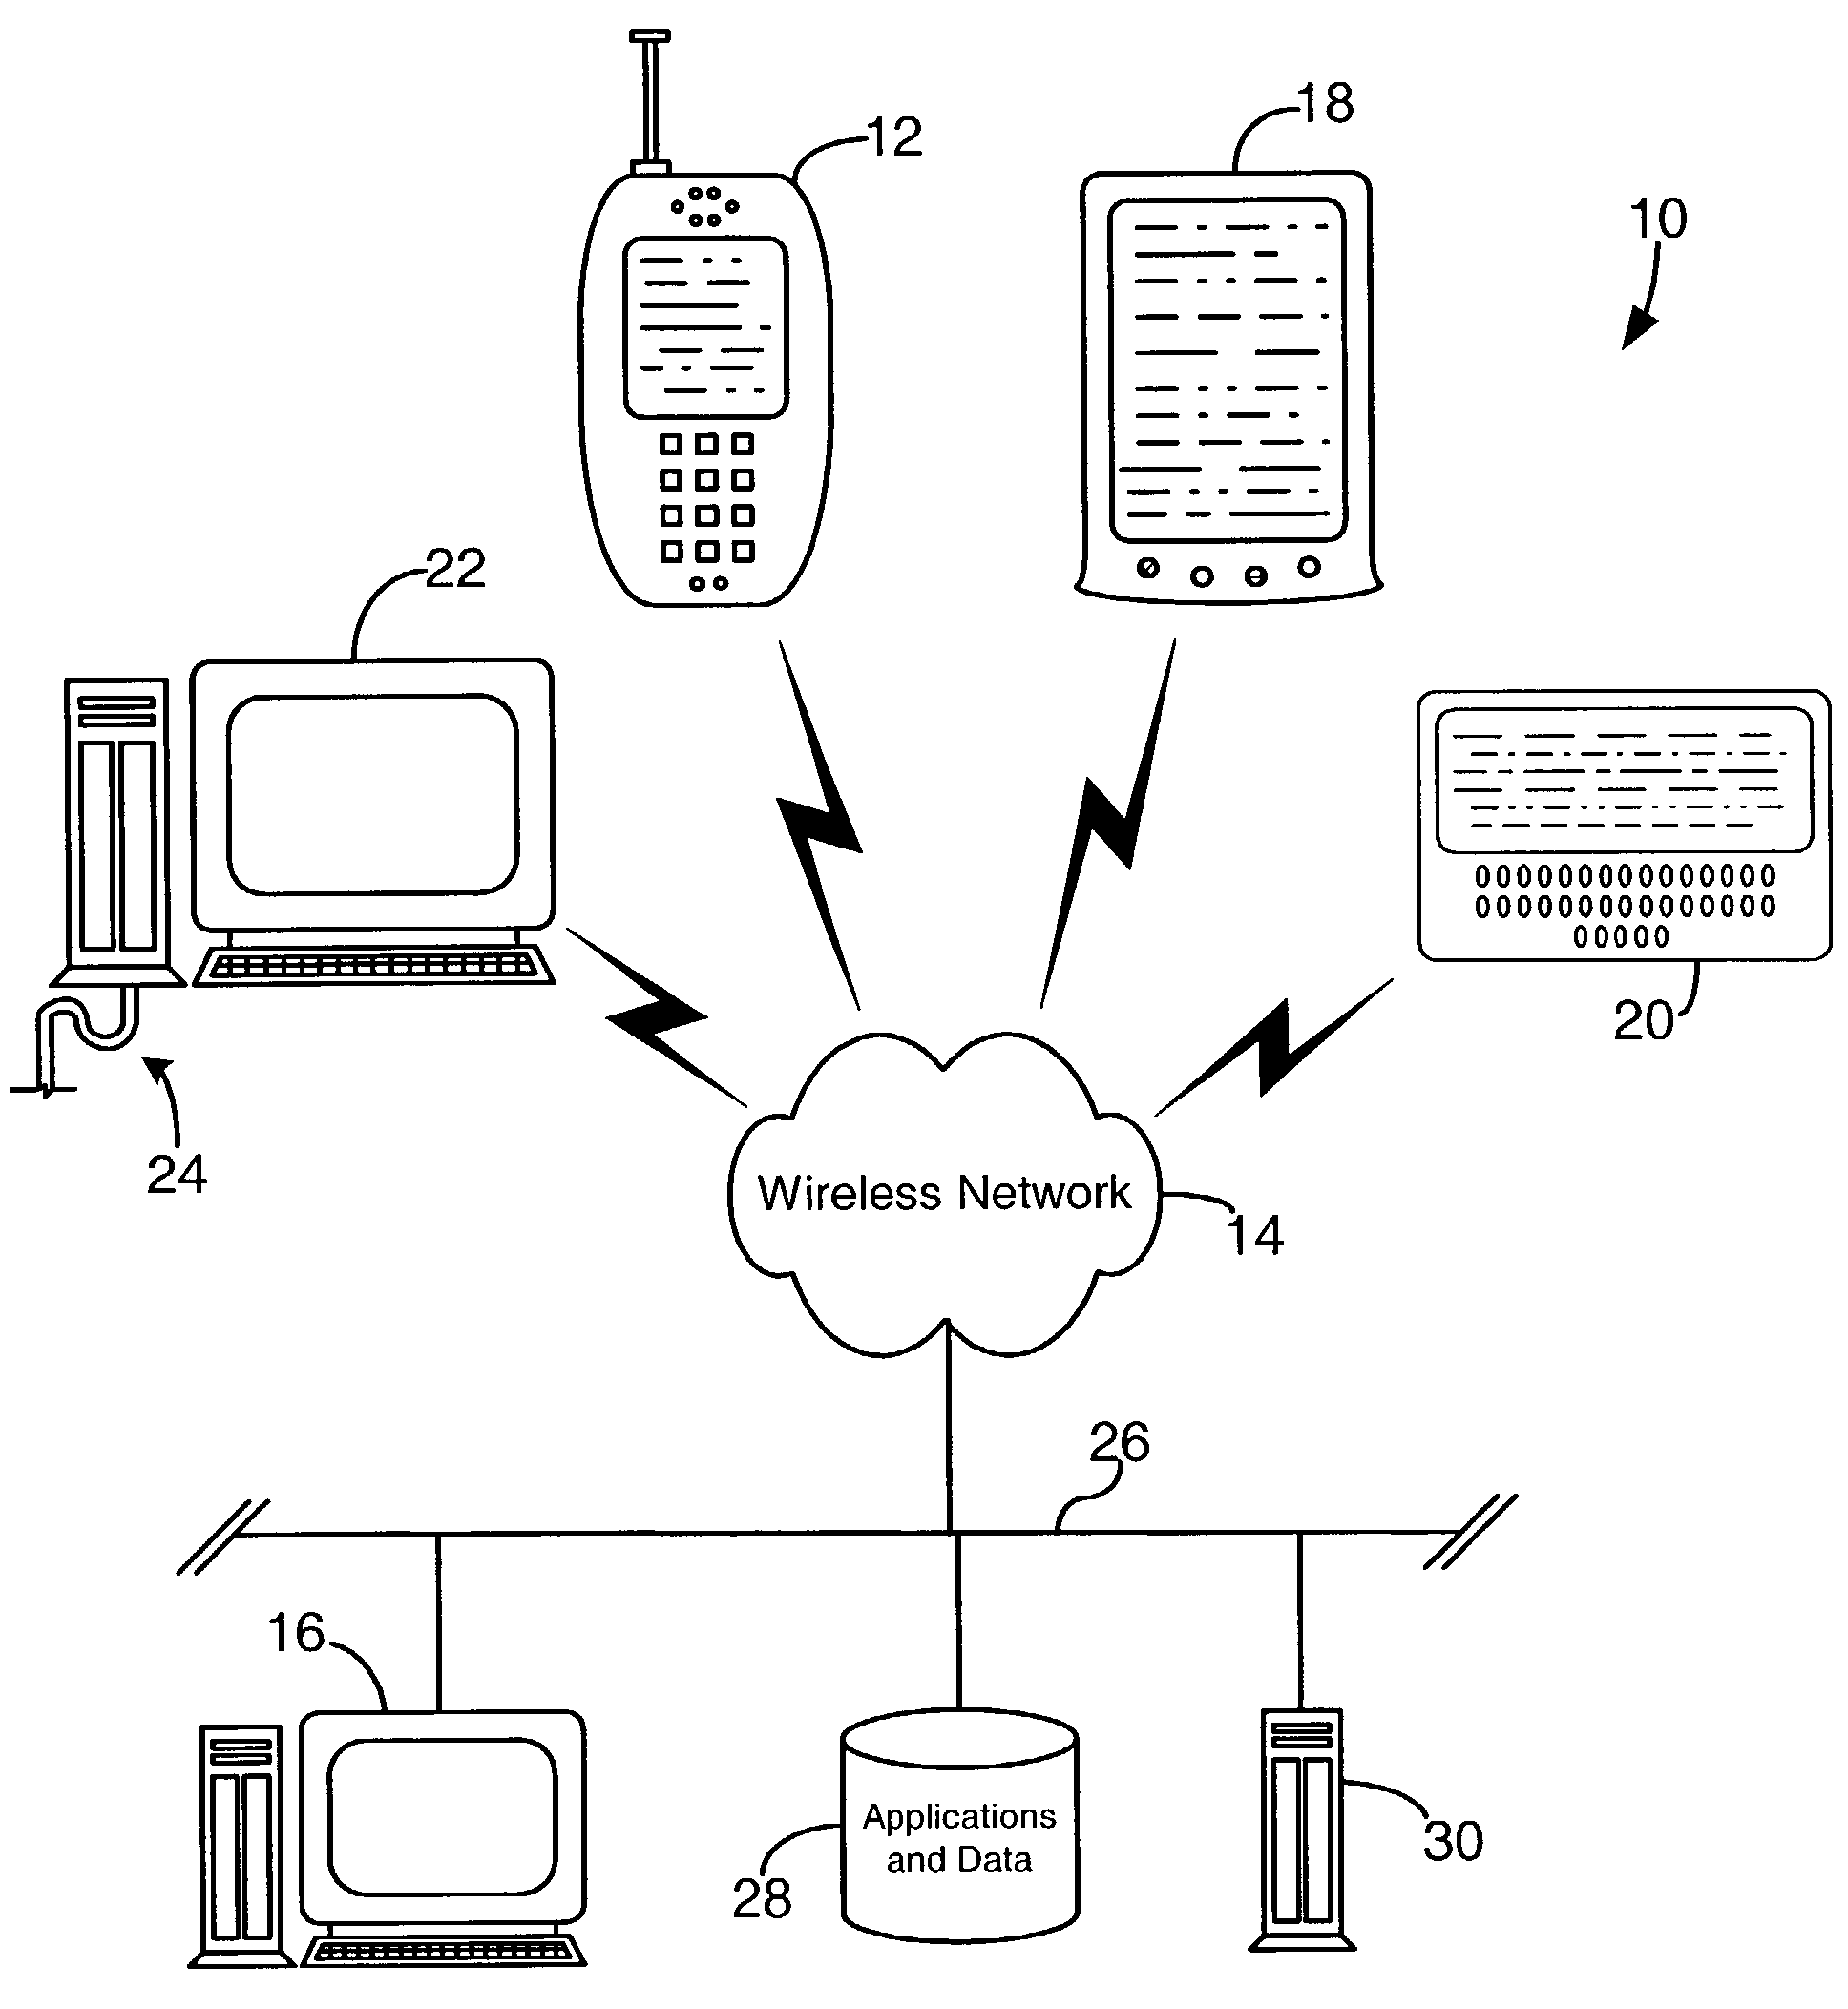 Data channel resource optimization for devices in a network